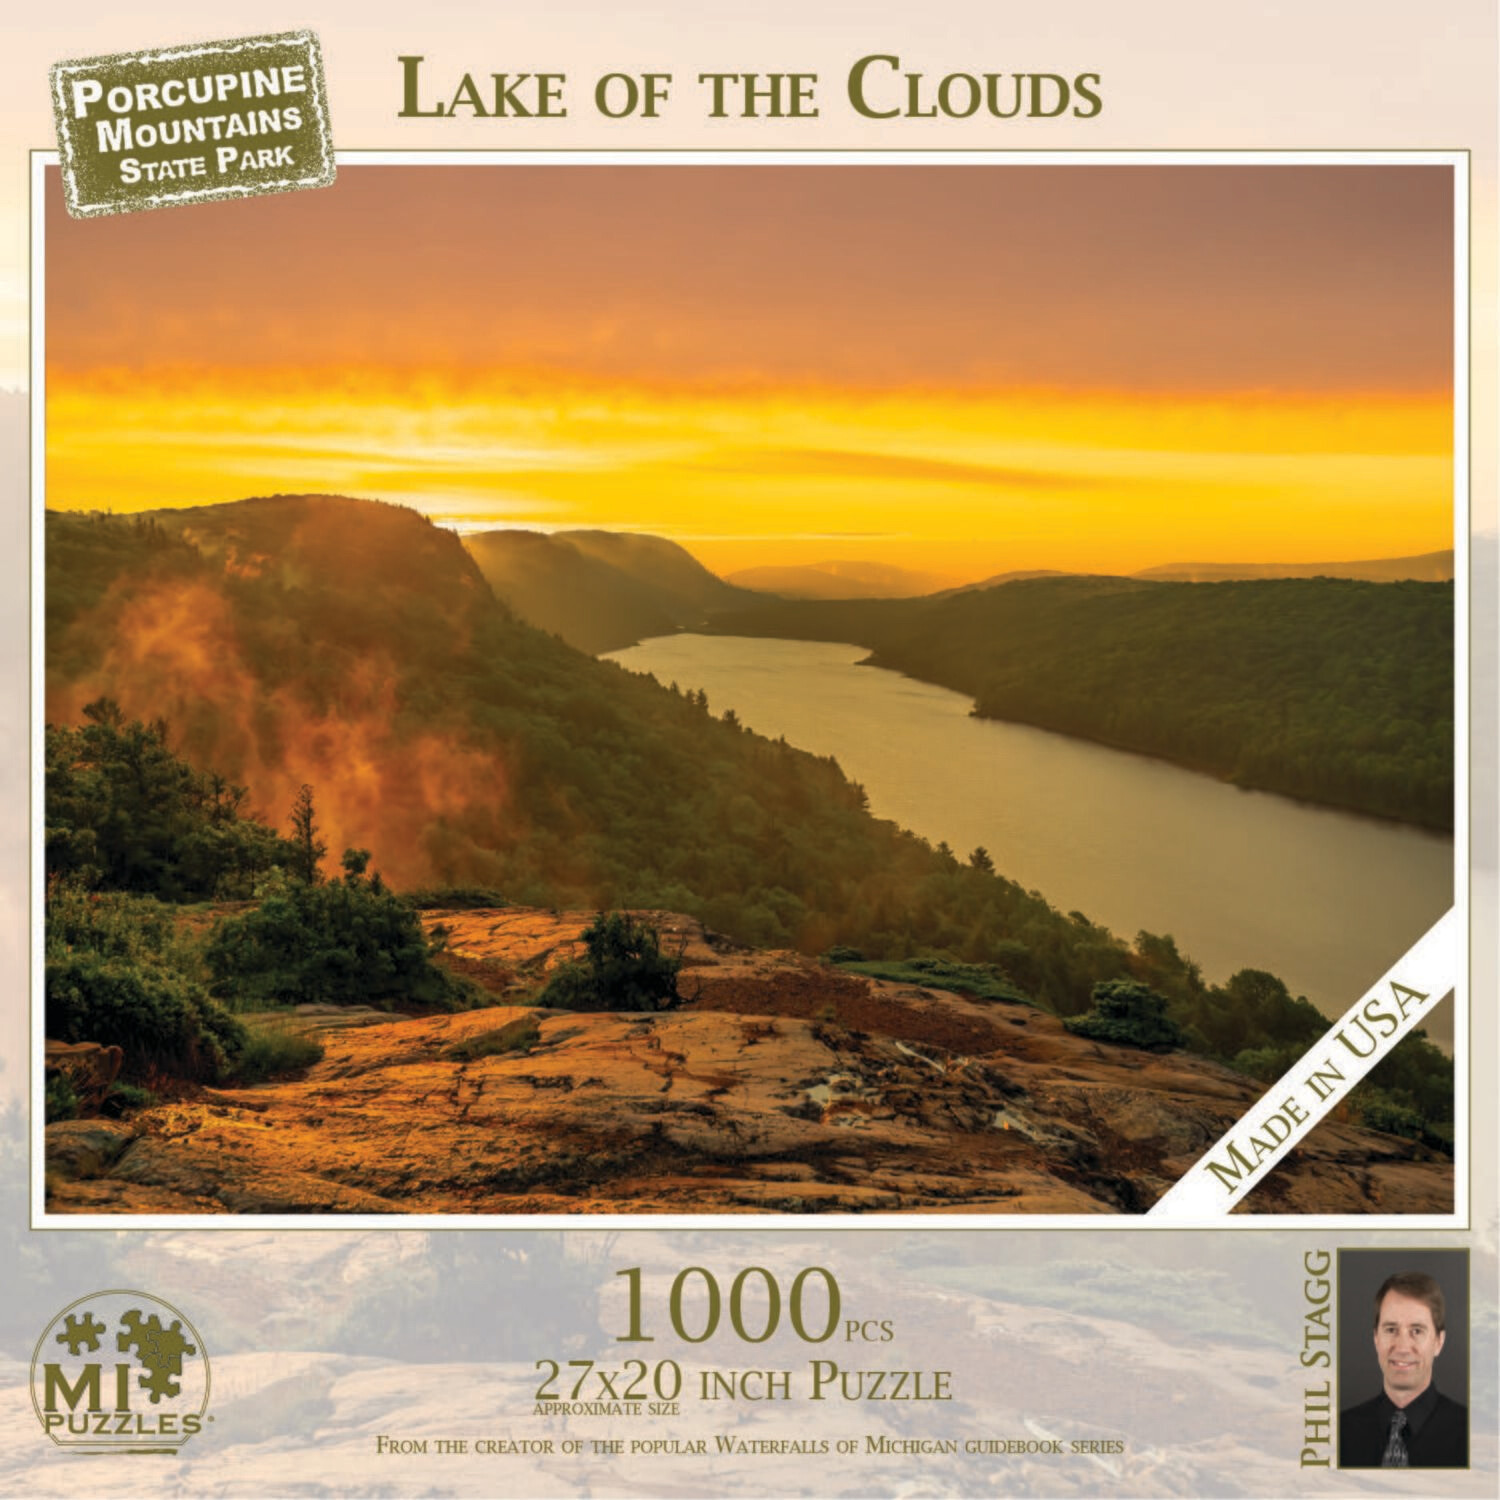 LAKE OF THE CLOUDS